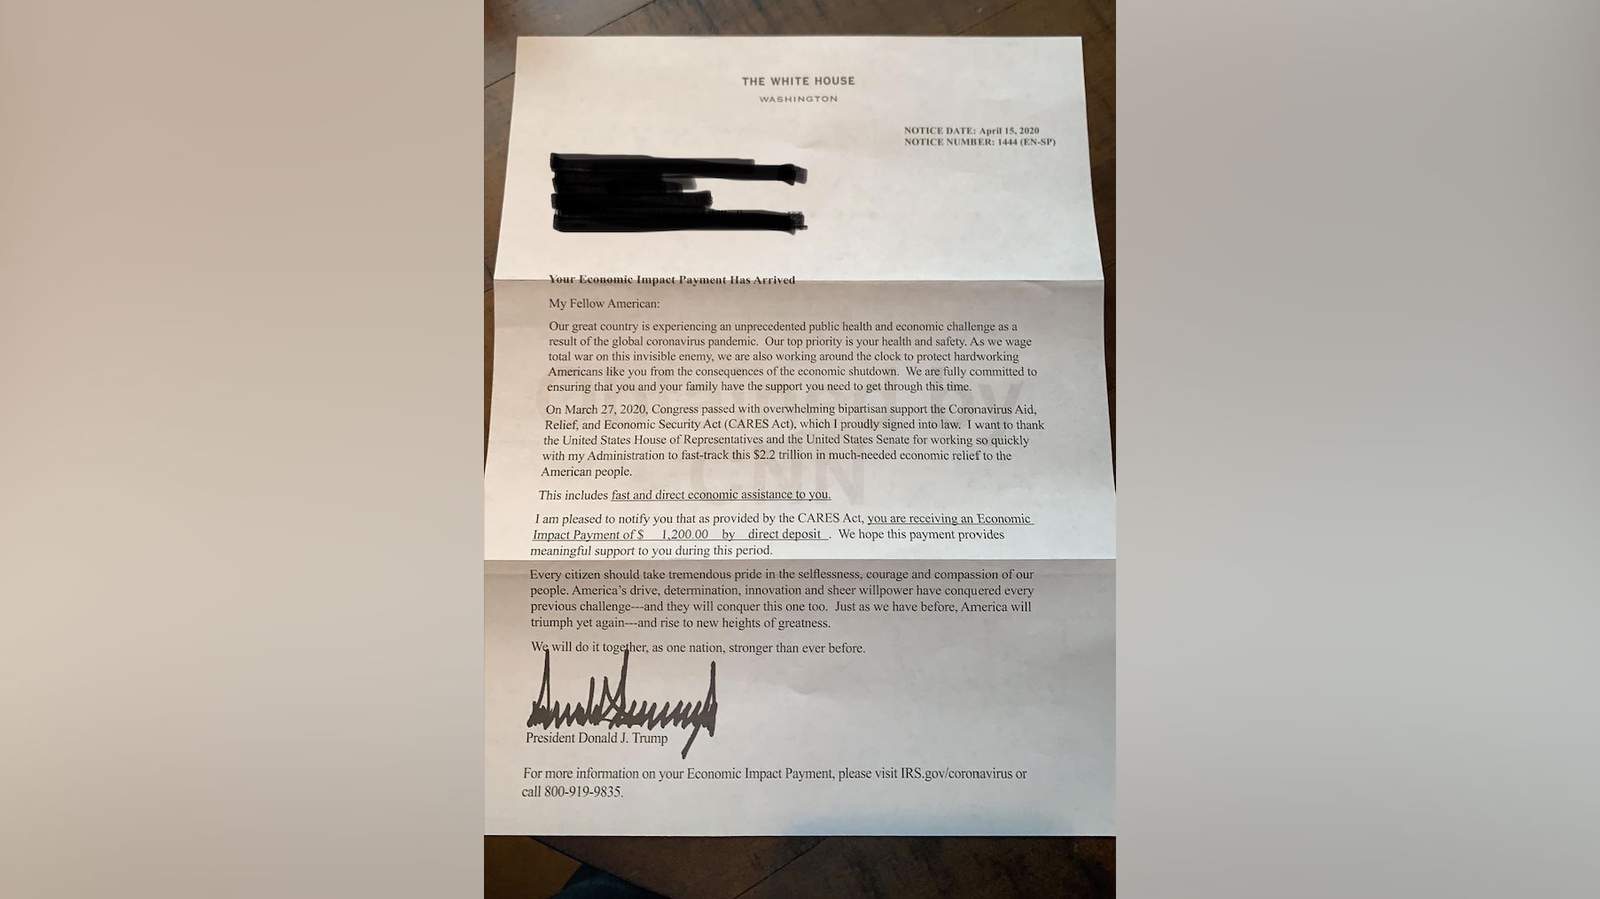 People receiving stimulus checks get letter signed by President Donald Trump